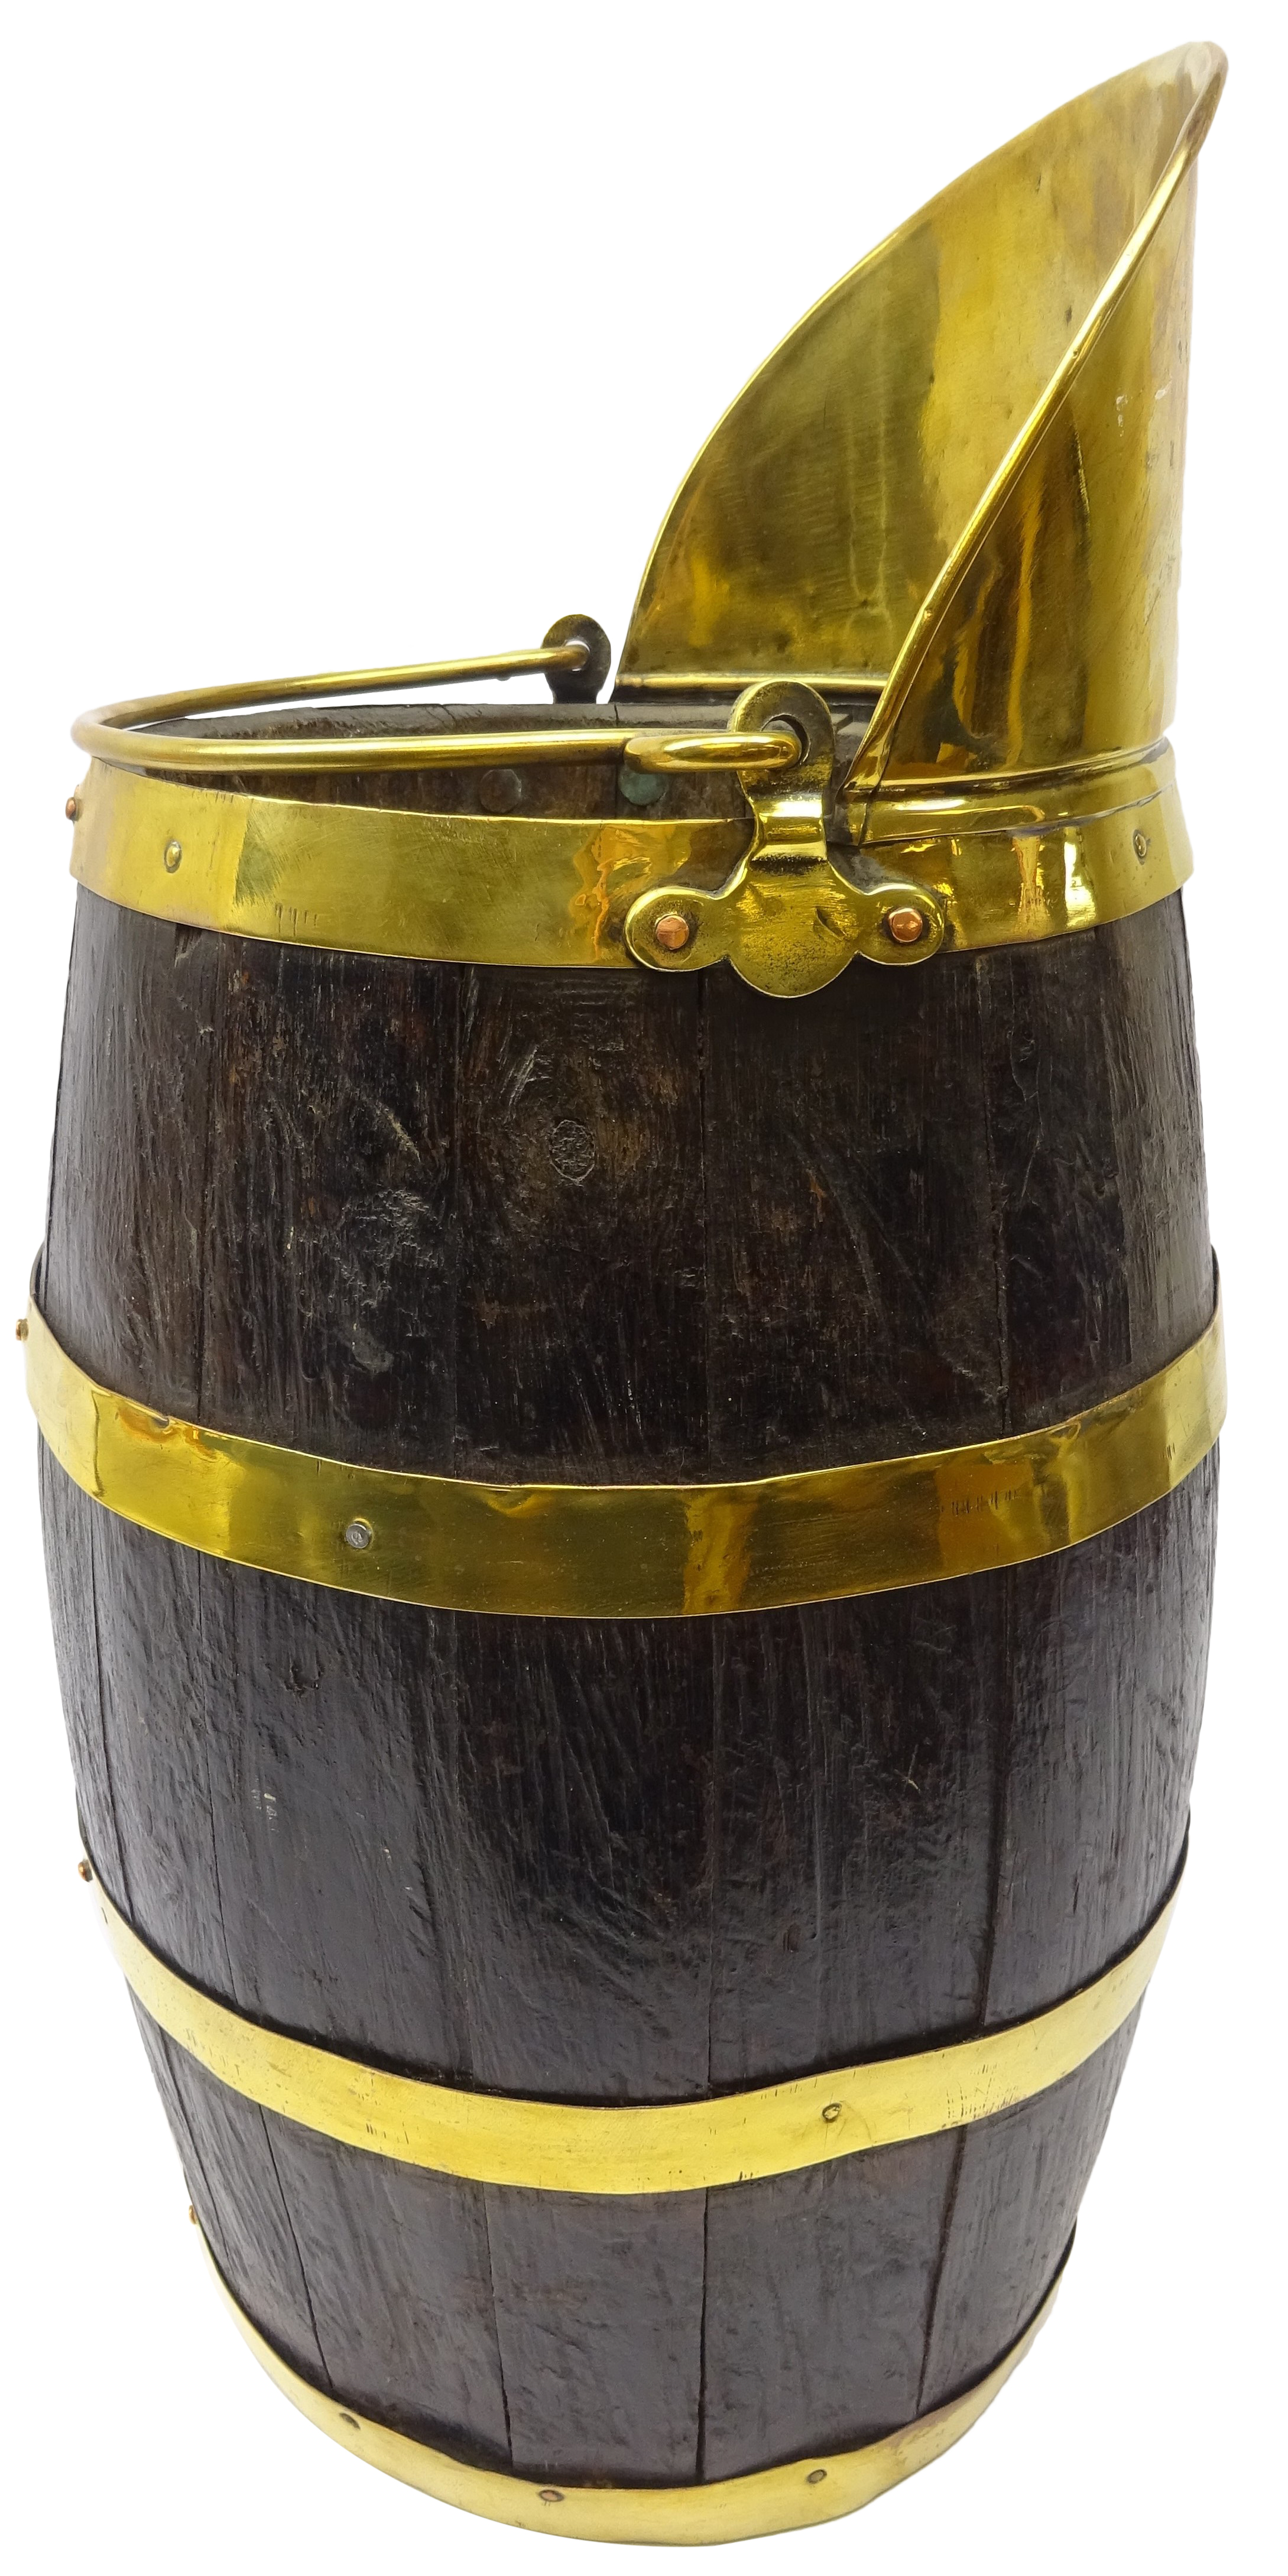 Early 20th century brass coopered oak coal barrel with brass swing handle and spout,